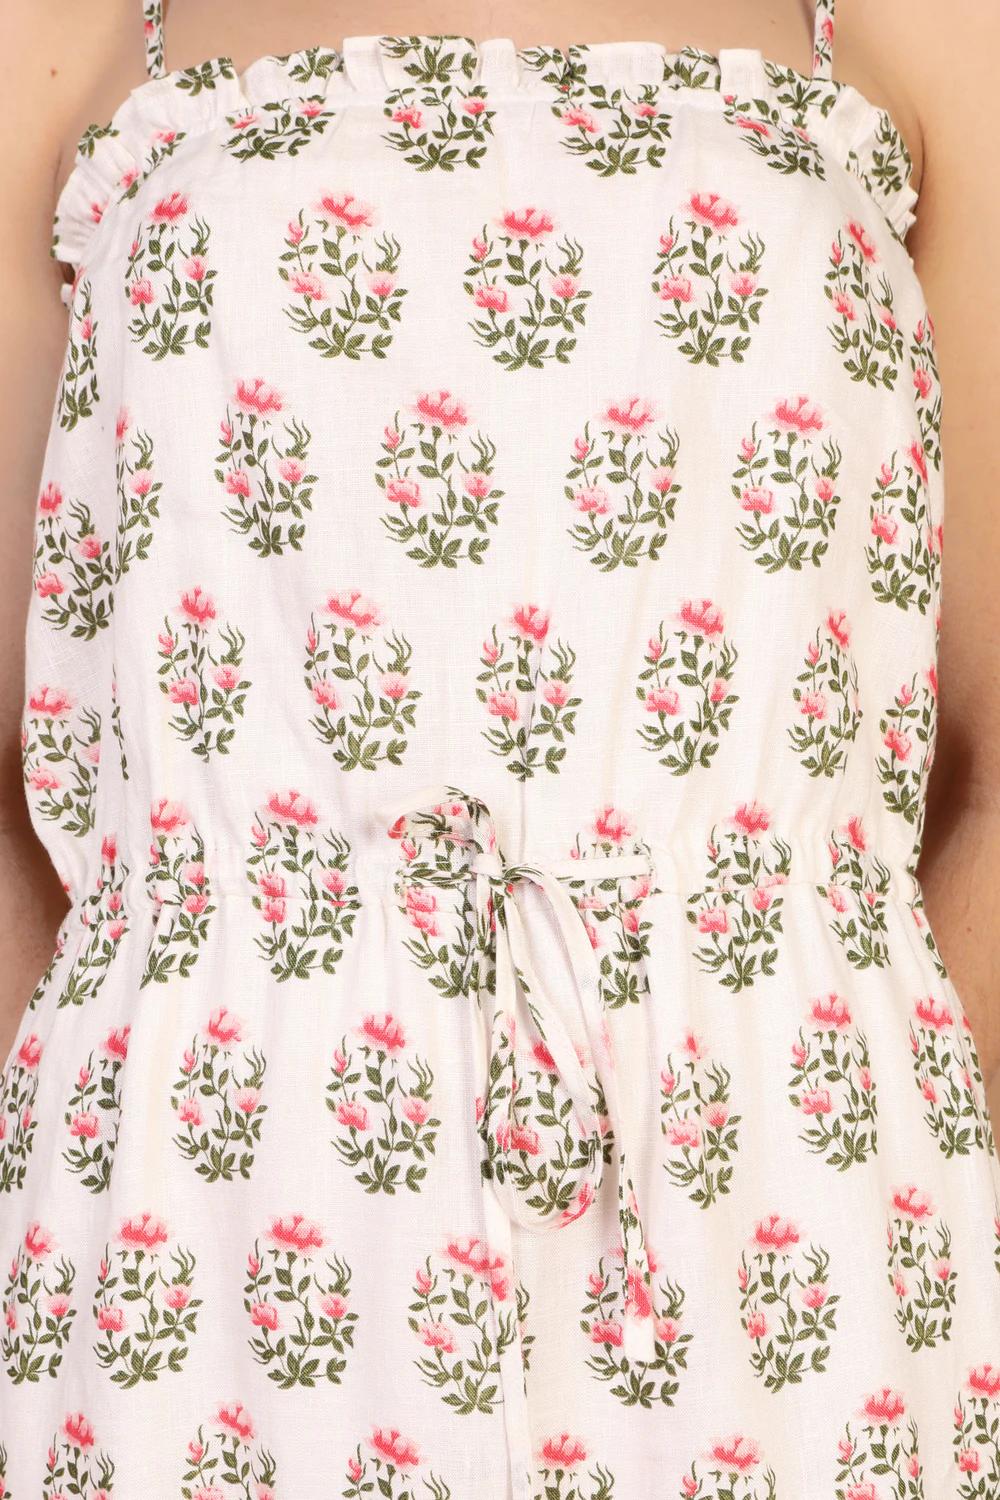 Product Image for Boston Dress, Block Print Floral